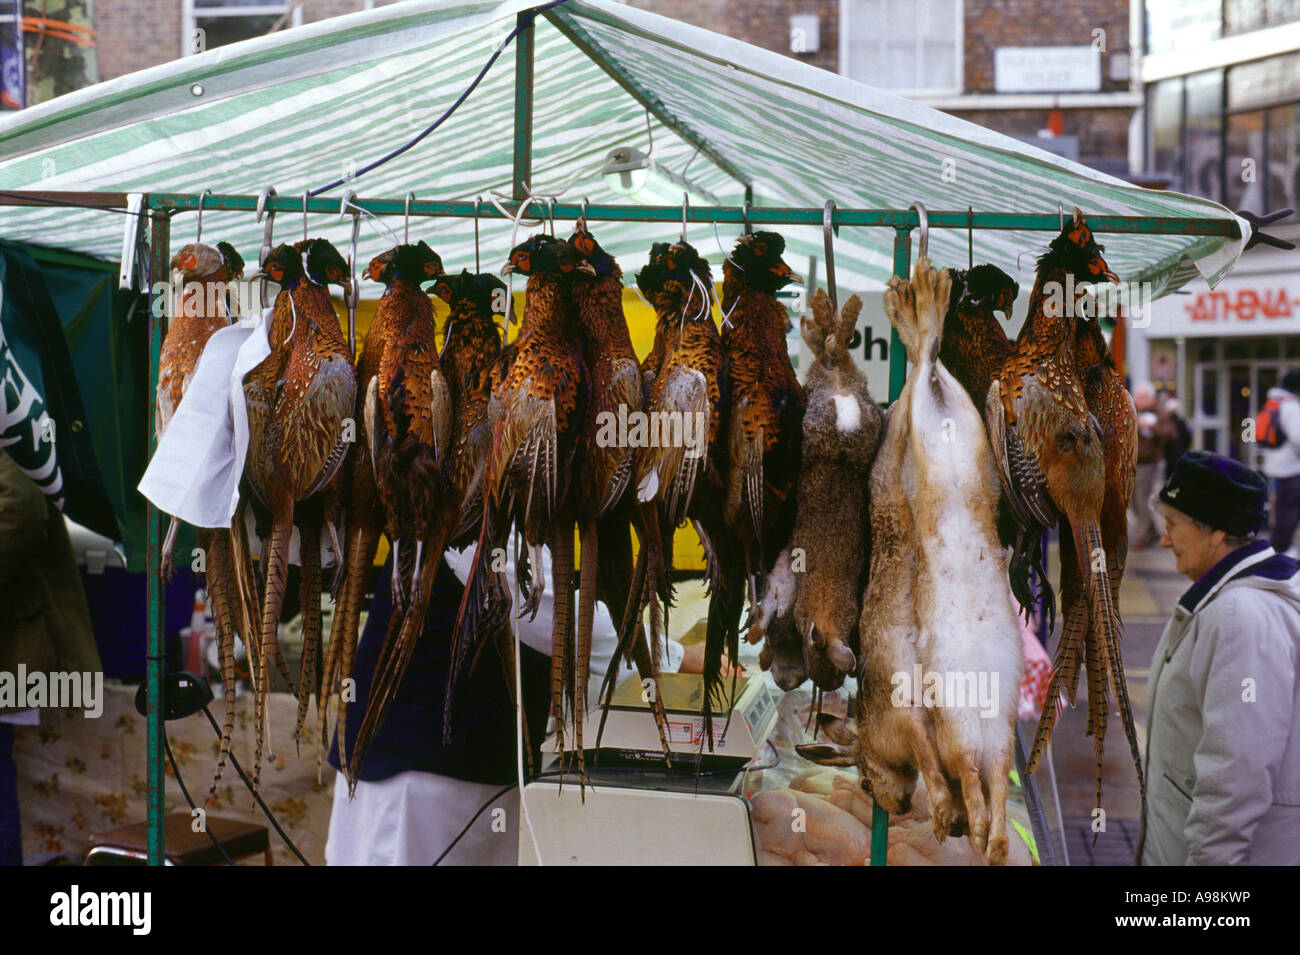 Pheasants, hares and rabbits hanging on a market stall in York Farmer's Market Stock Photo